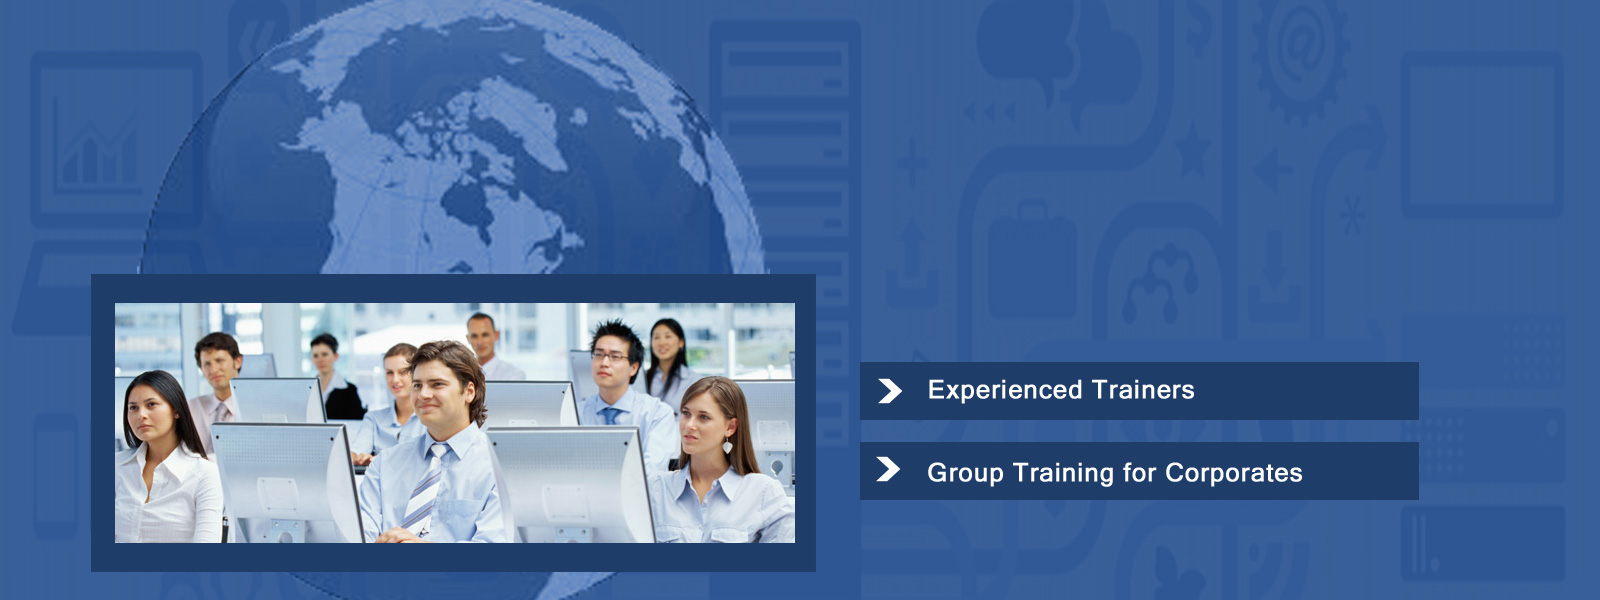 Corporate Training for companies IT needs